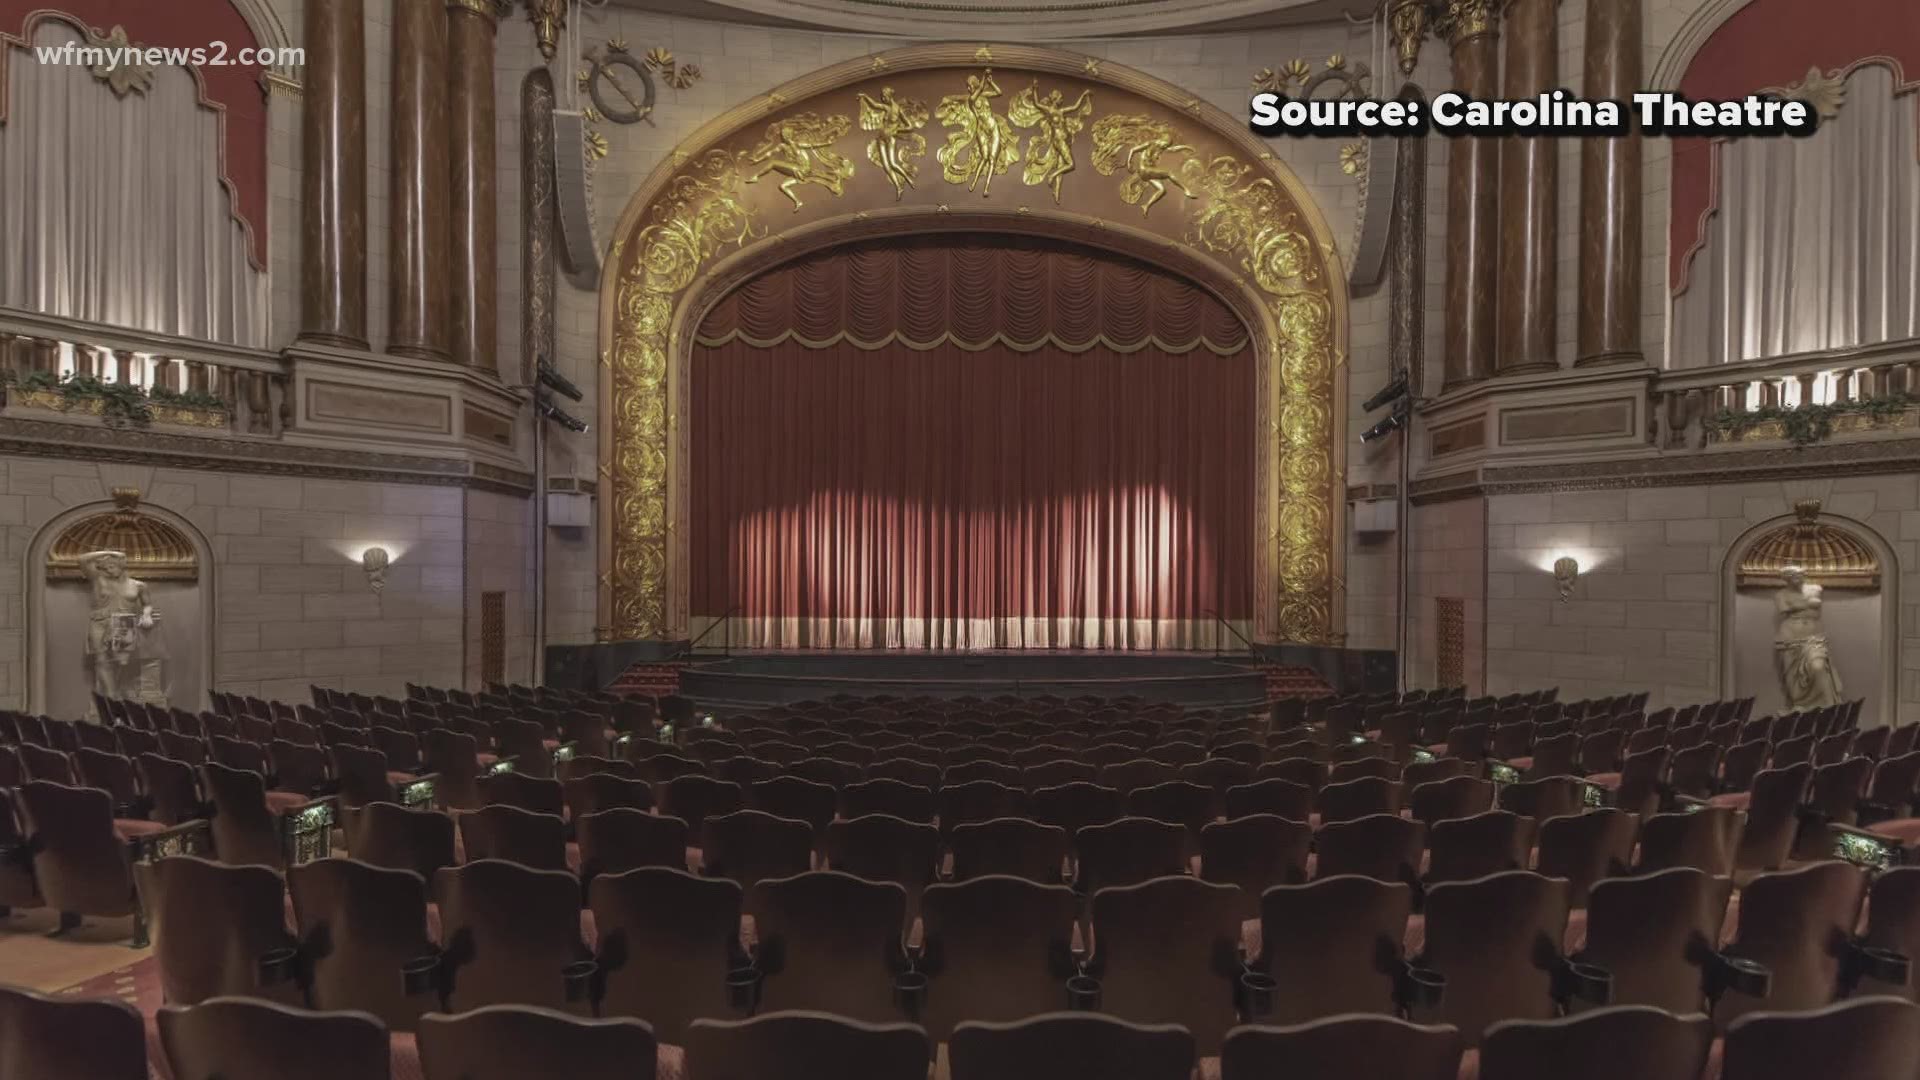 With safety in mind, the folks at The Carolina Theatre are getting ready to take us back in time.